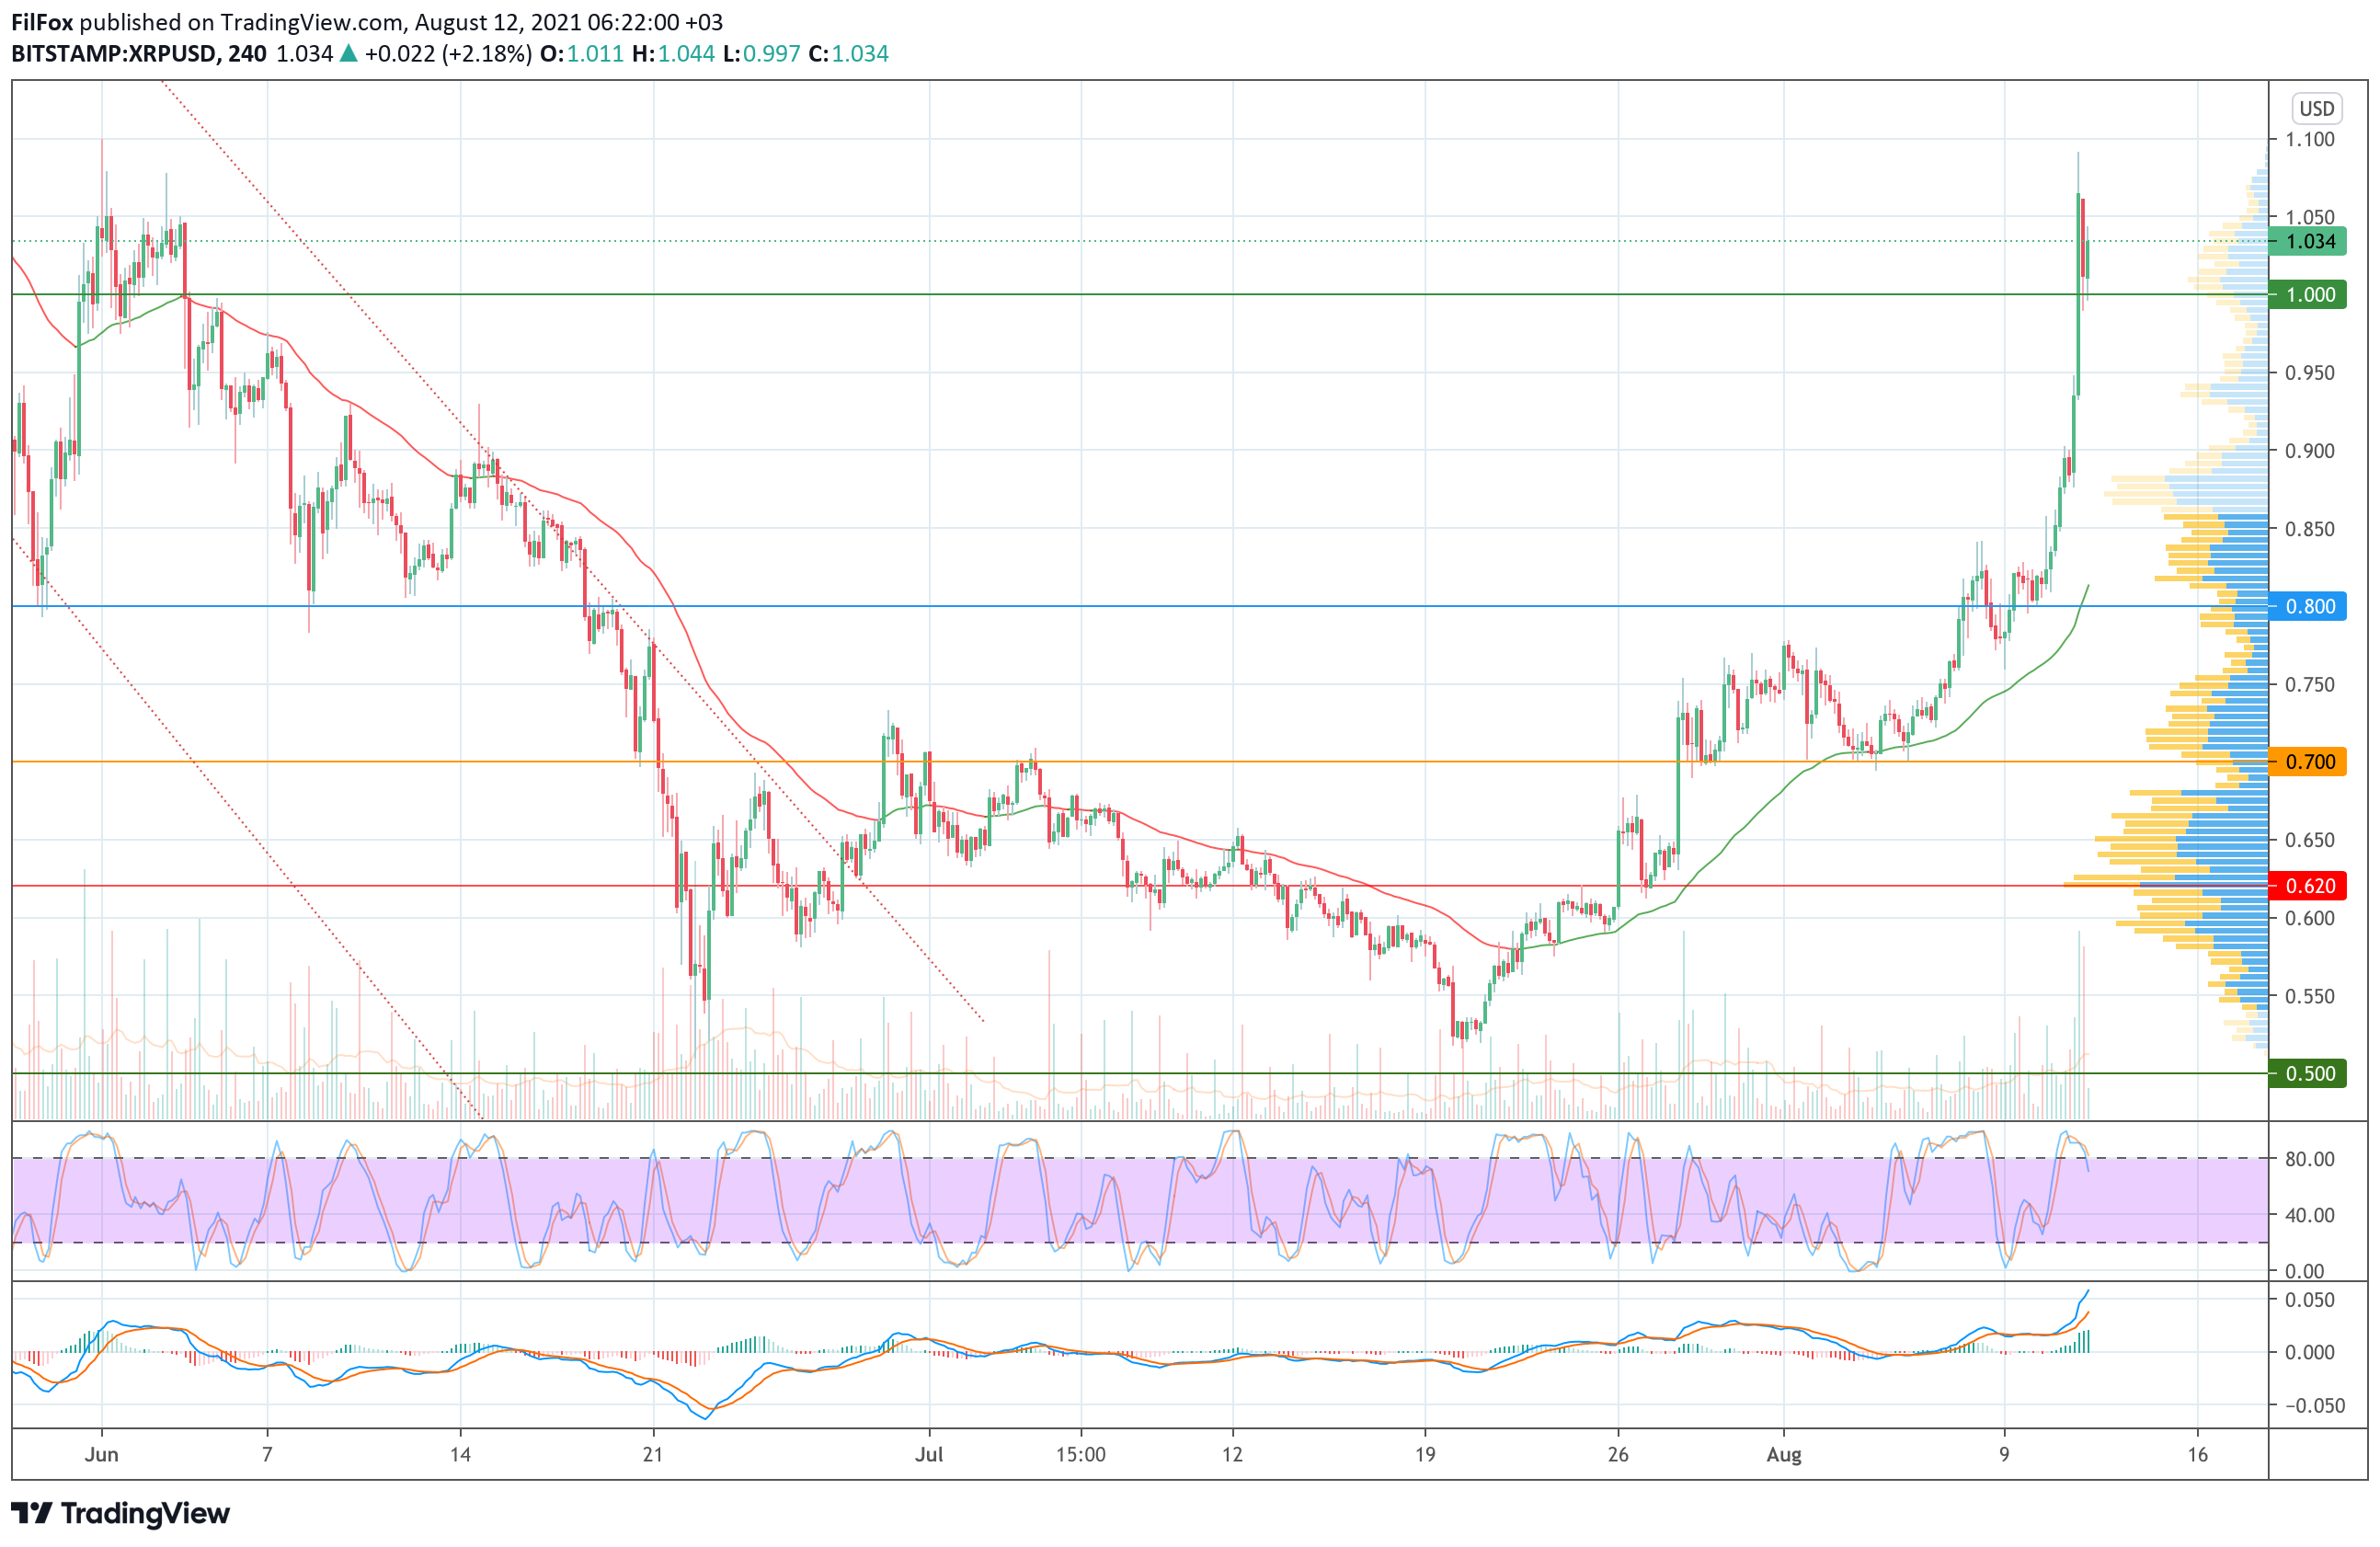 Analysis of the prices of Bitcoin, Ethereum, XRP for 08/12/2021